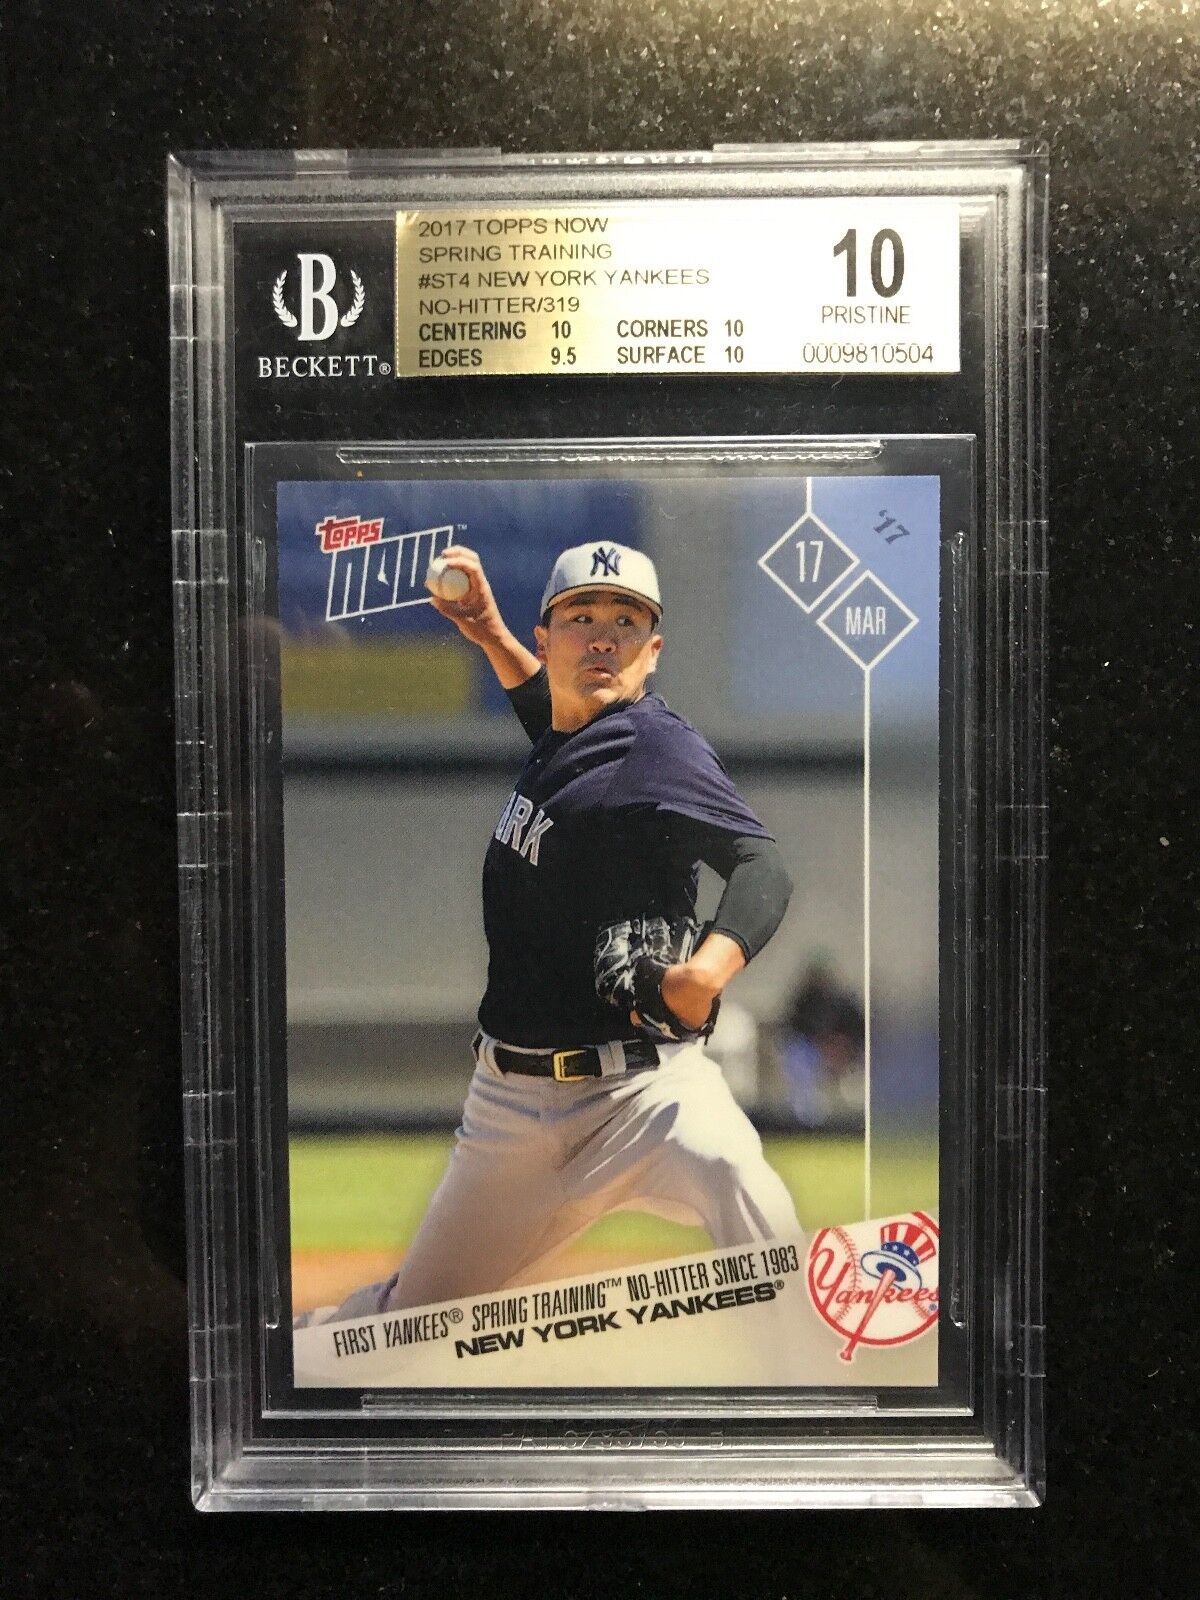 2017 Topps Now Yankees Spring No-Hitter Tanaka 319 SOLD $1000- THIS BGS 10 $$$$$